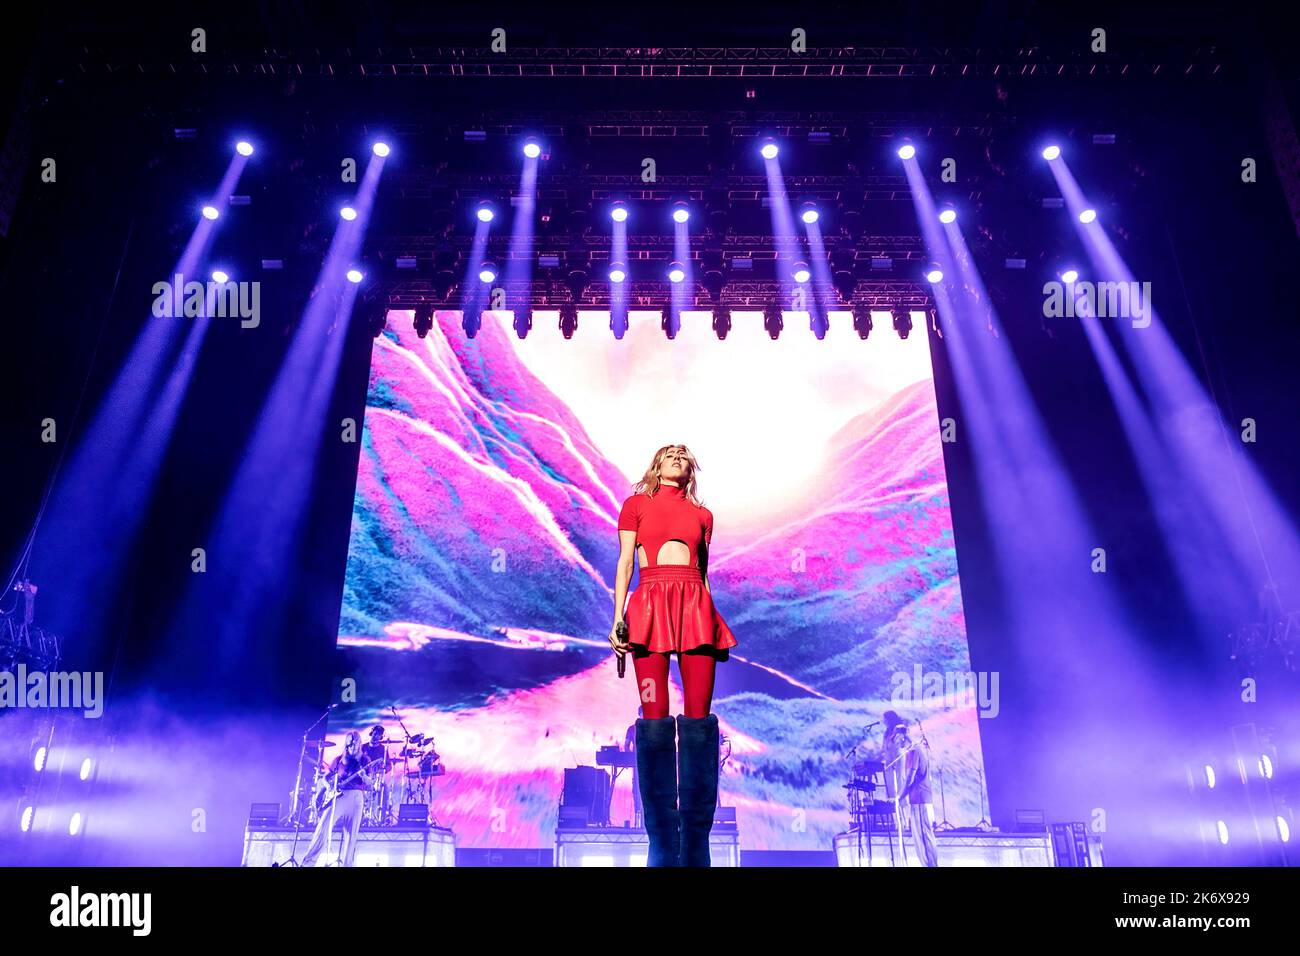 Oslo, Norway. 14th, October 2022. The Swedish pop singer, musician and songwriter Veronica Maggio performs a live concert at Oslo Spektrum in Oslo. (Photo credit: Gonzales Photo - Terje Dokken). Stock Photo